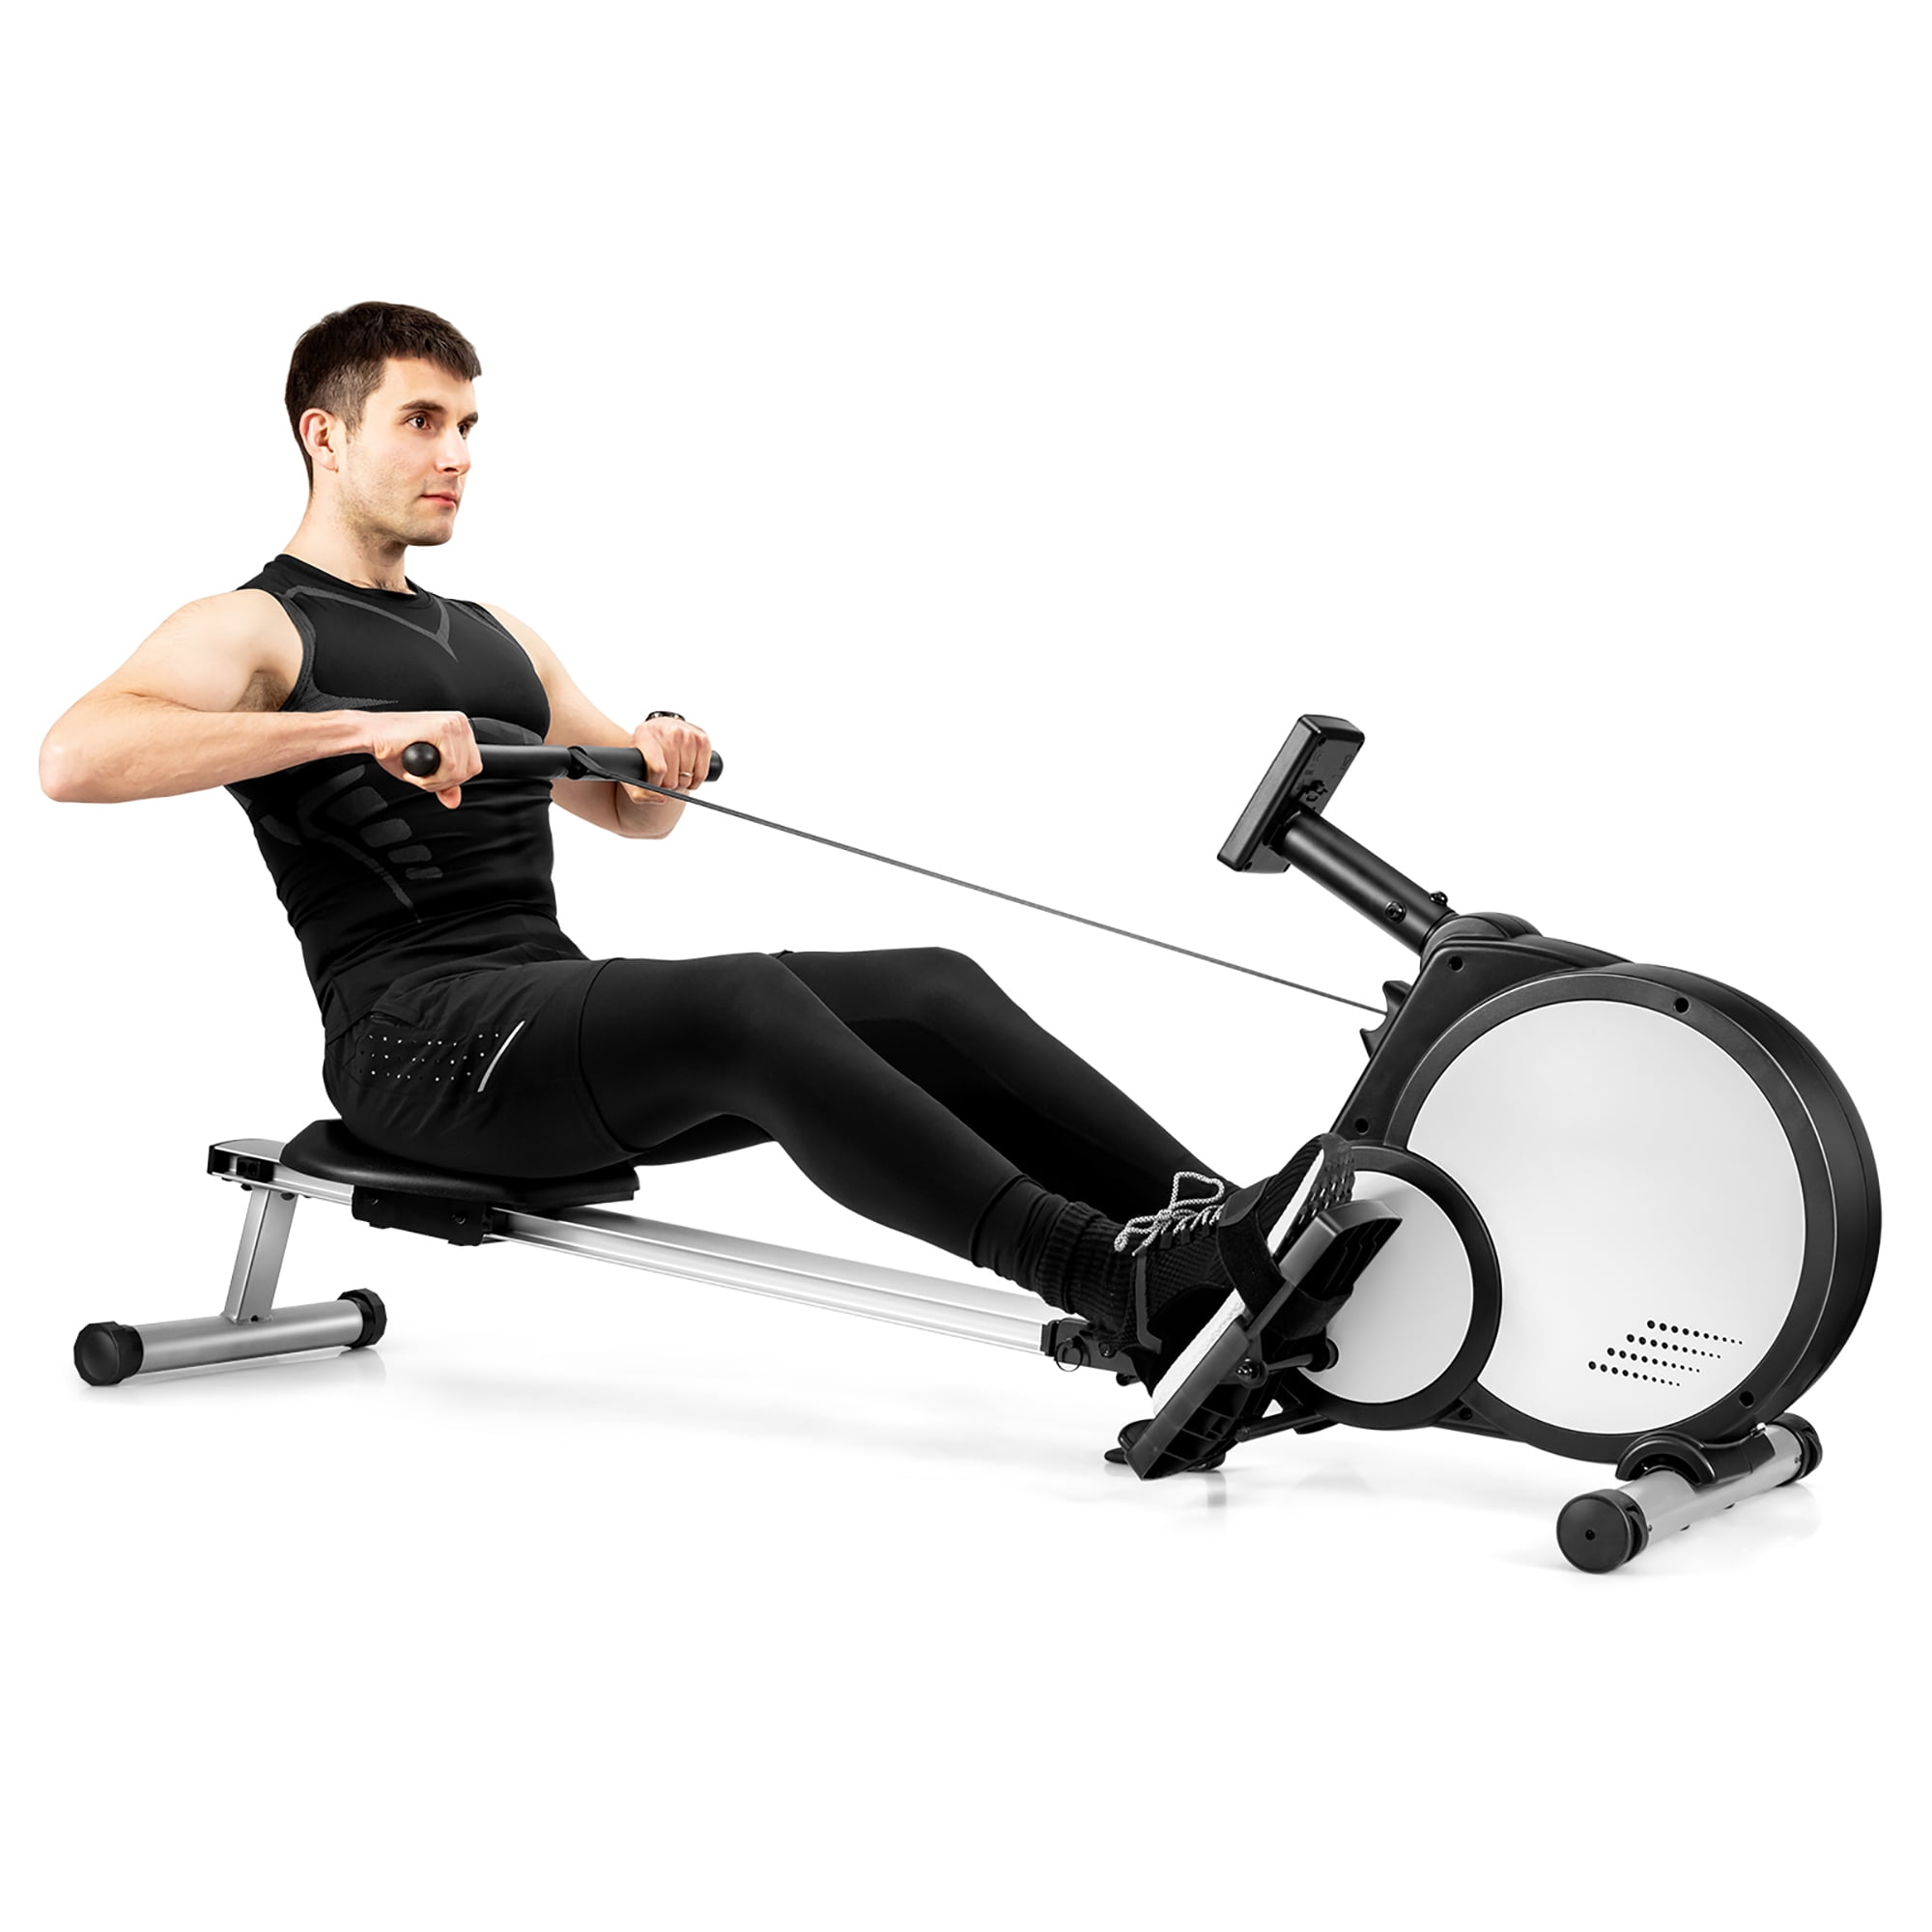 Rower Exercise Machine with Digital Monitor for Home Gym Indoor Rowing Machine 